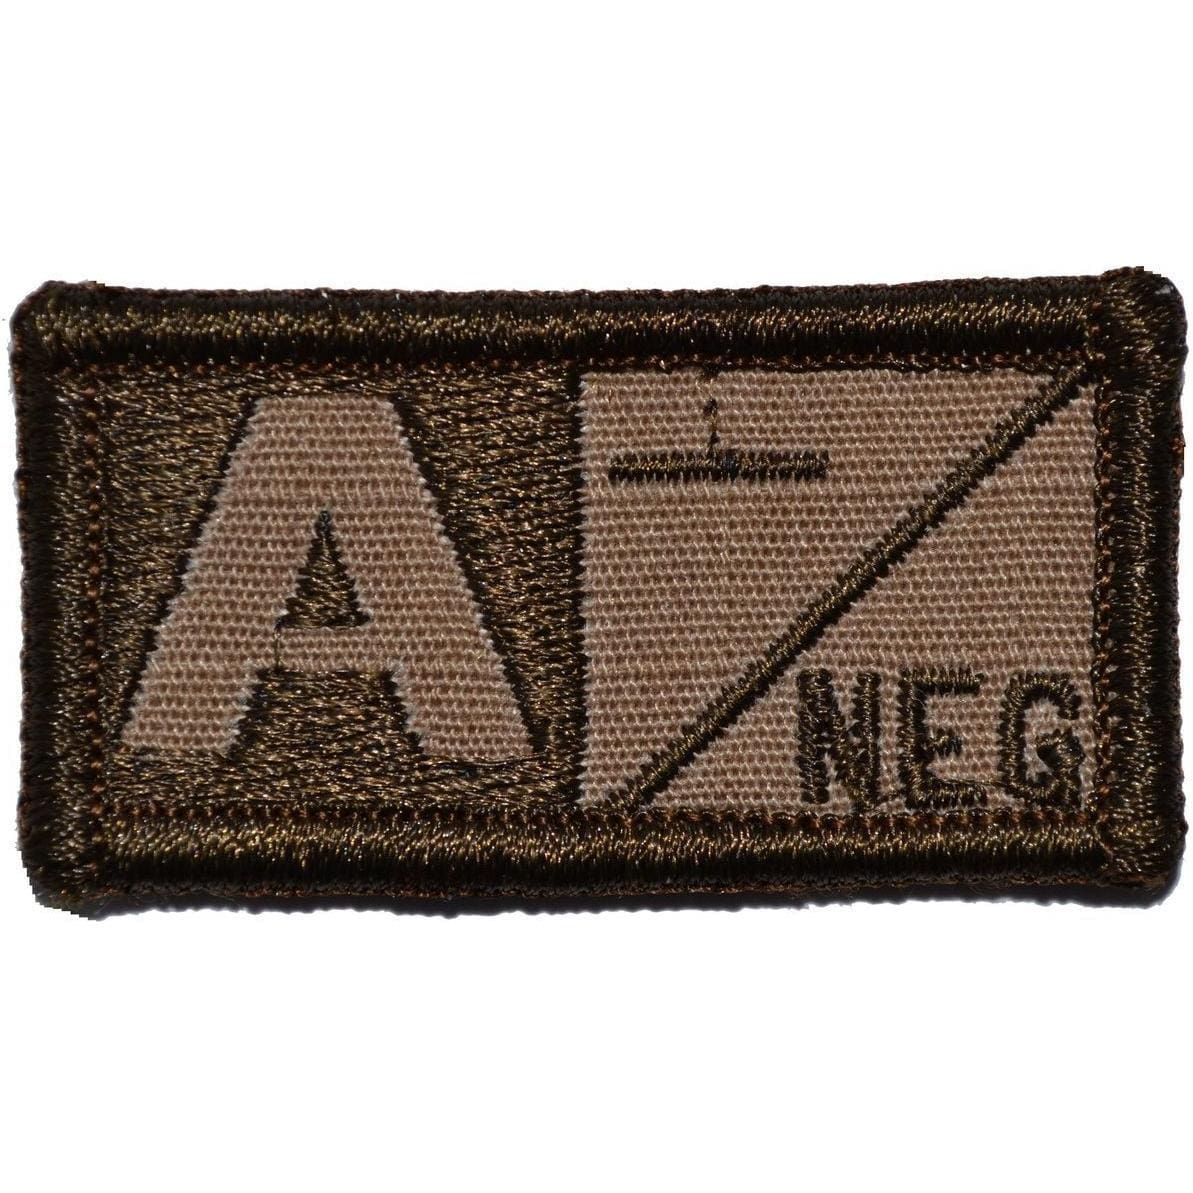 Tactical Gear Junkie Patches Coyote Brown Blood Type - 1x2 Patch